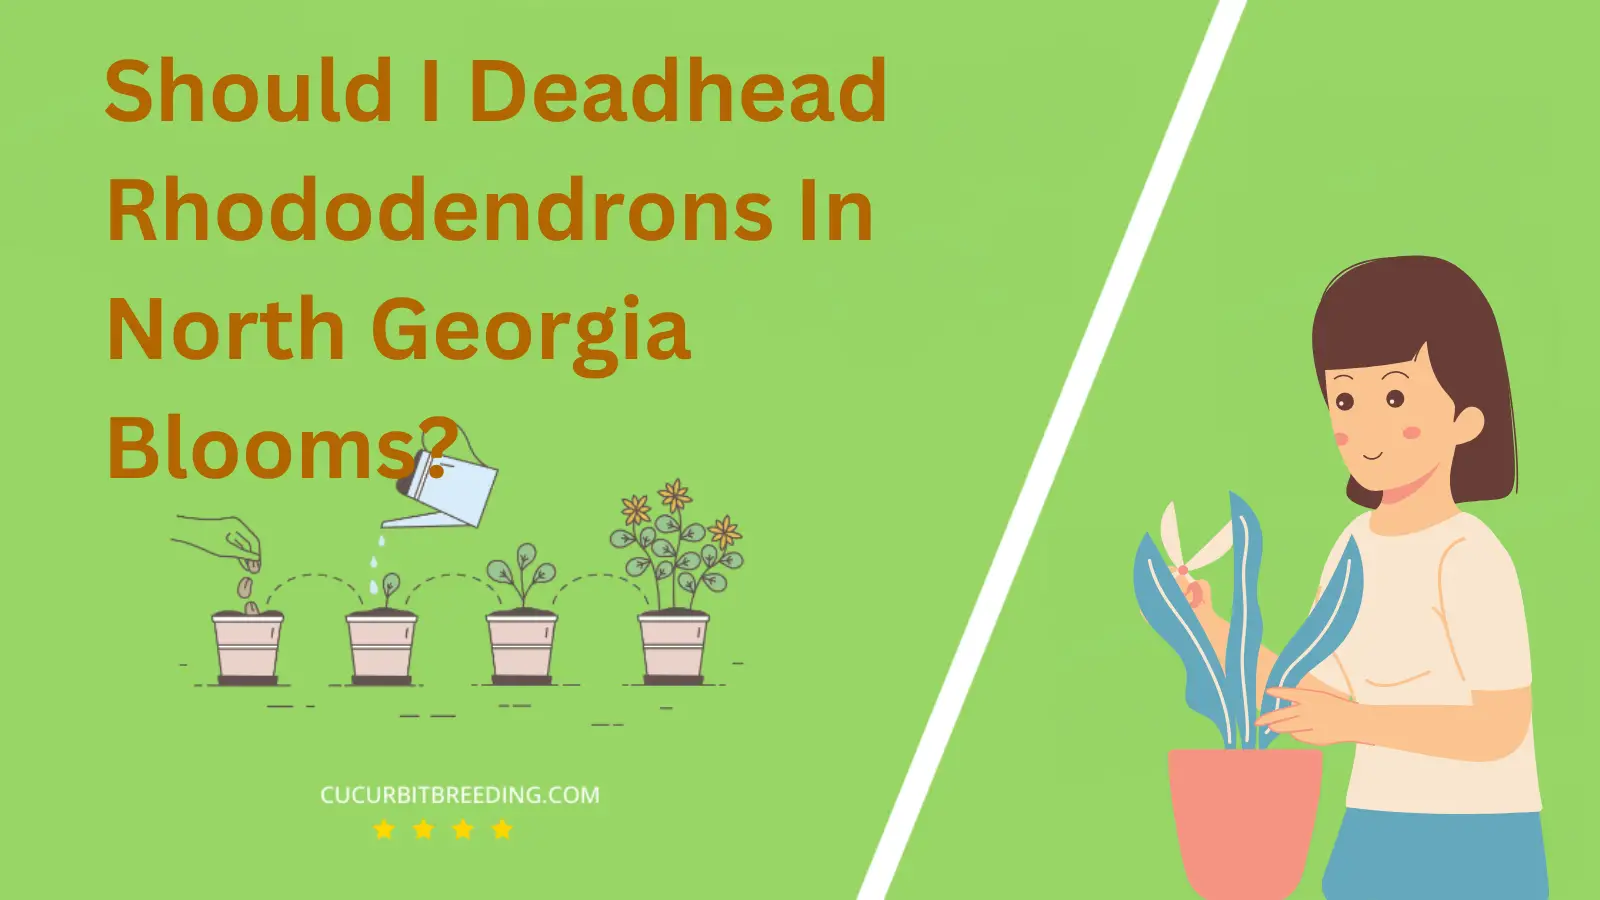 Should I Deadhead Rhododendrons In North Georgia Blooms?